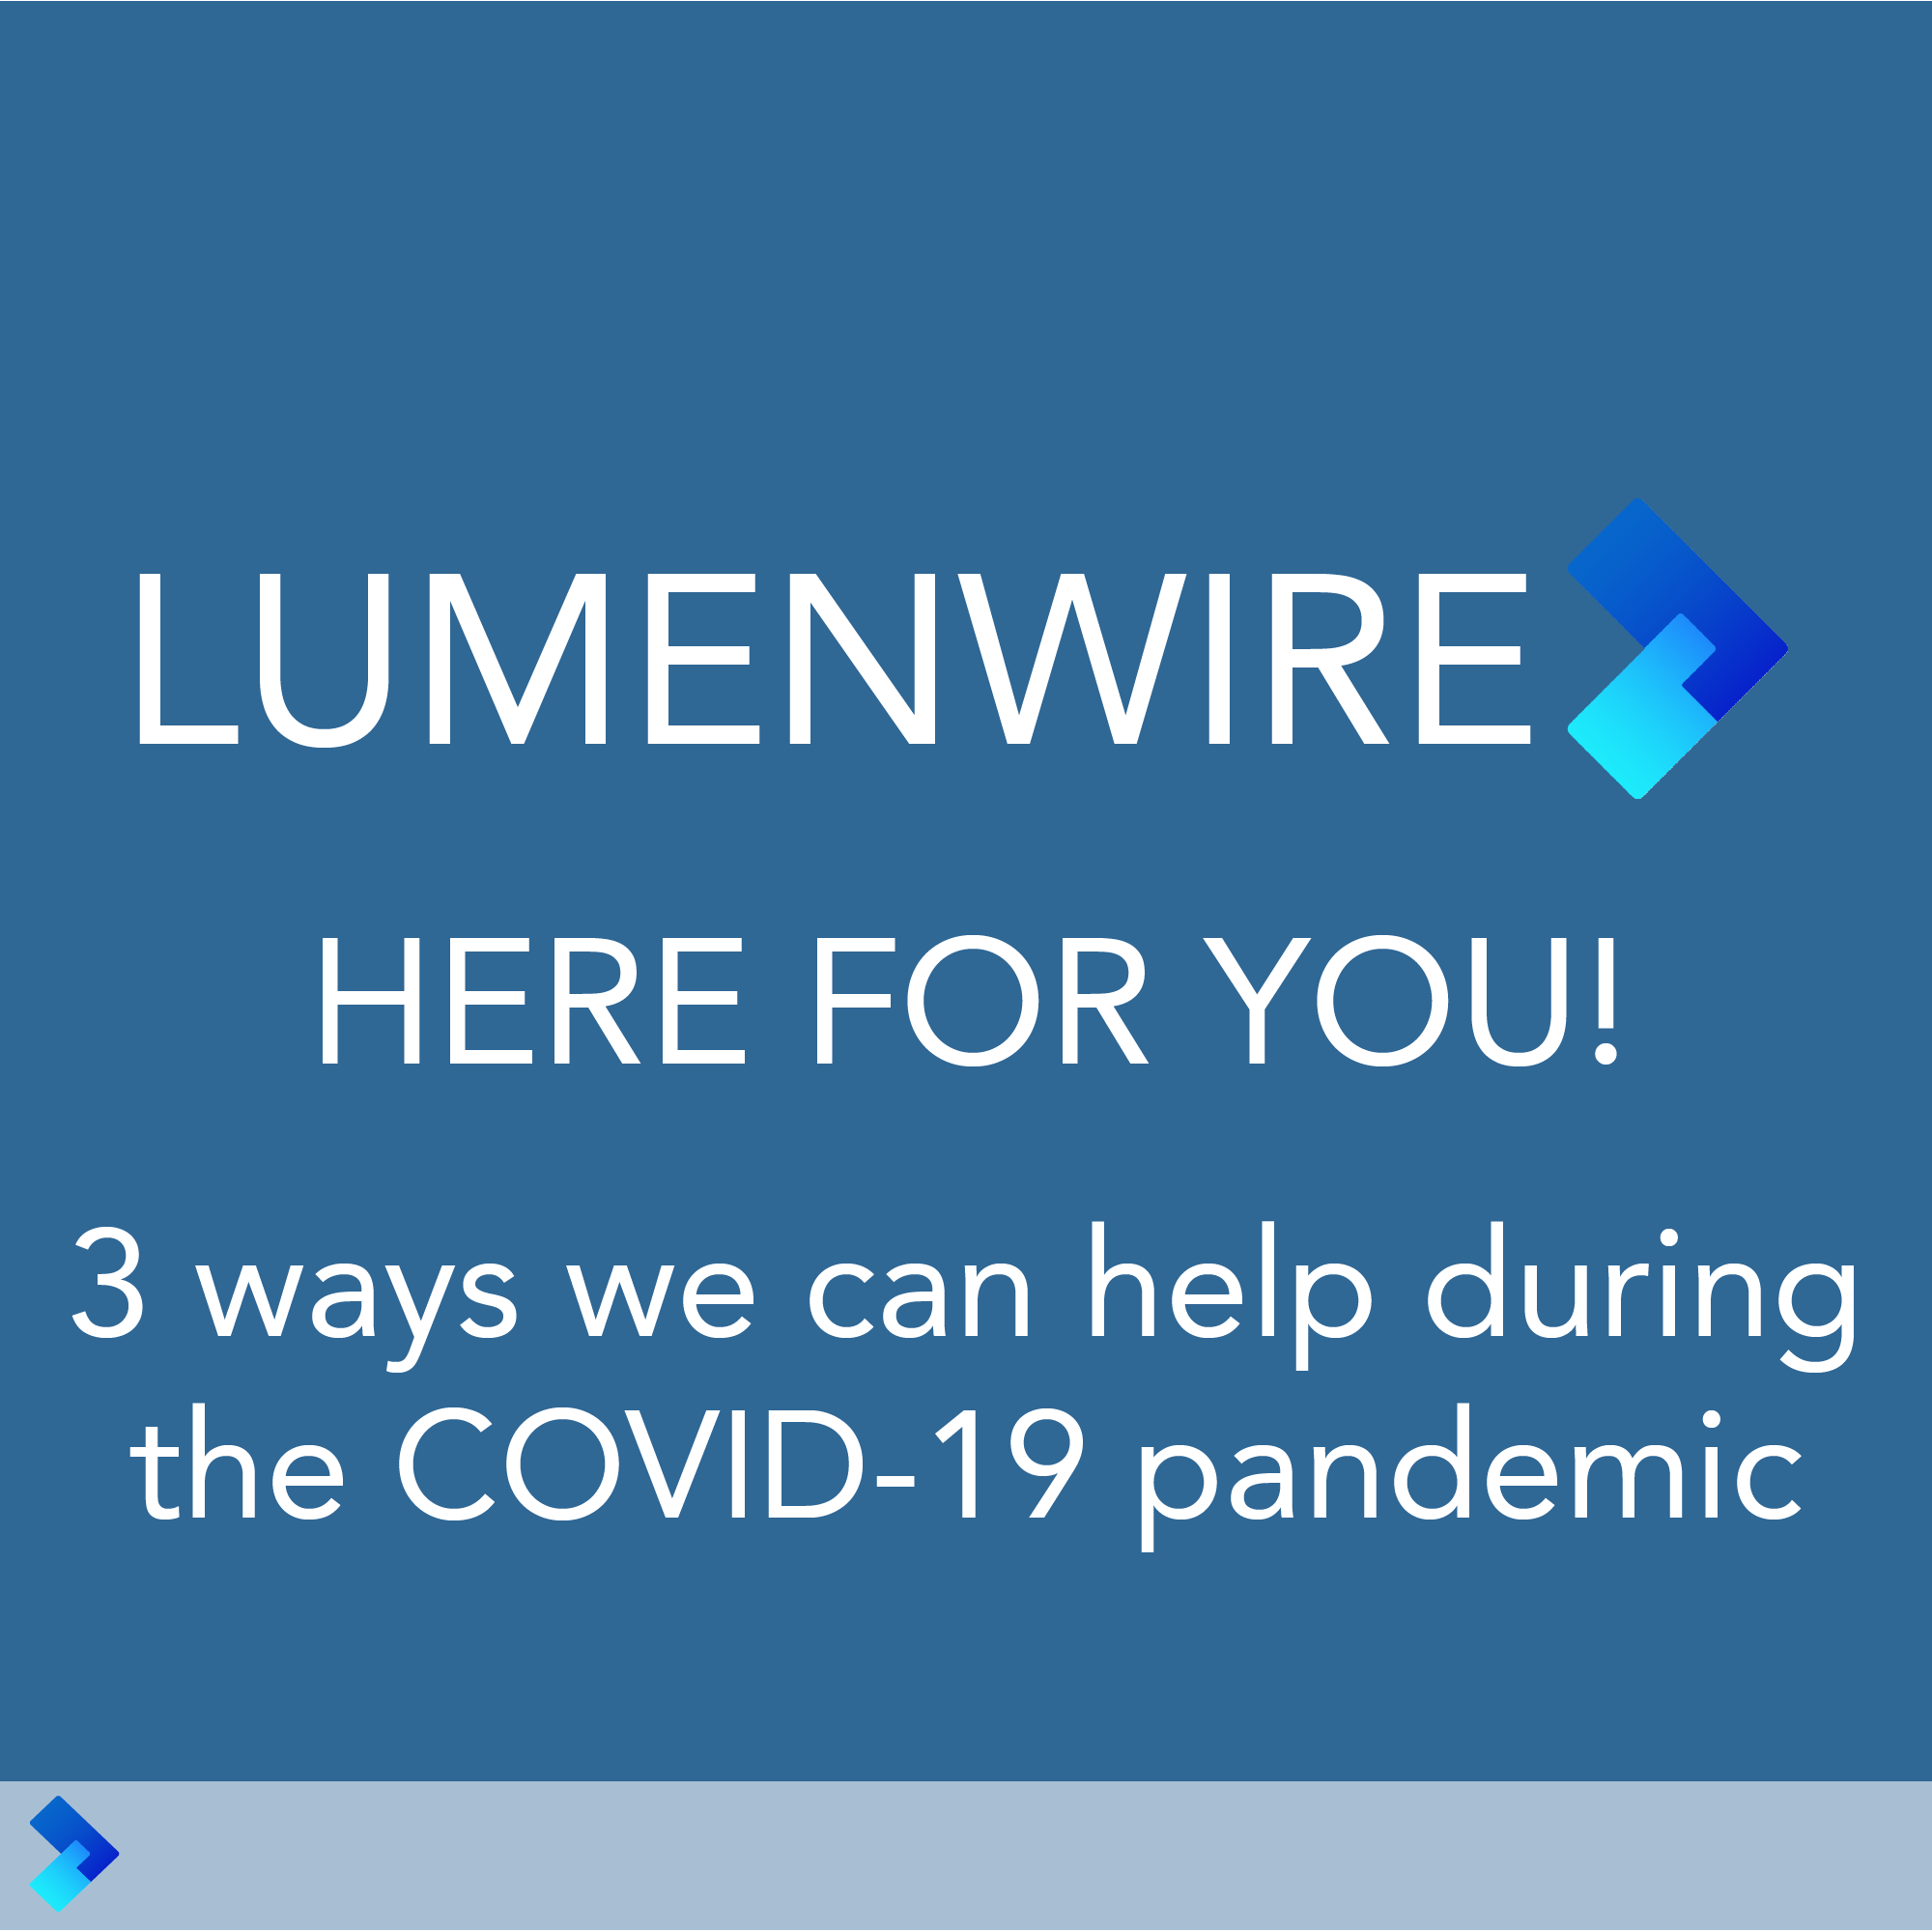 COVID-19 STATEMENT: WE ARE HERE FOR YOU!